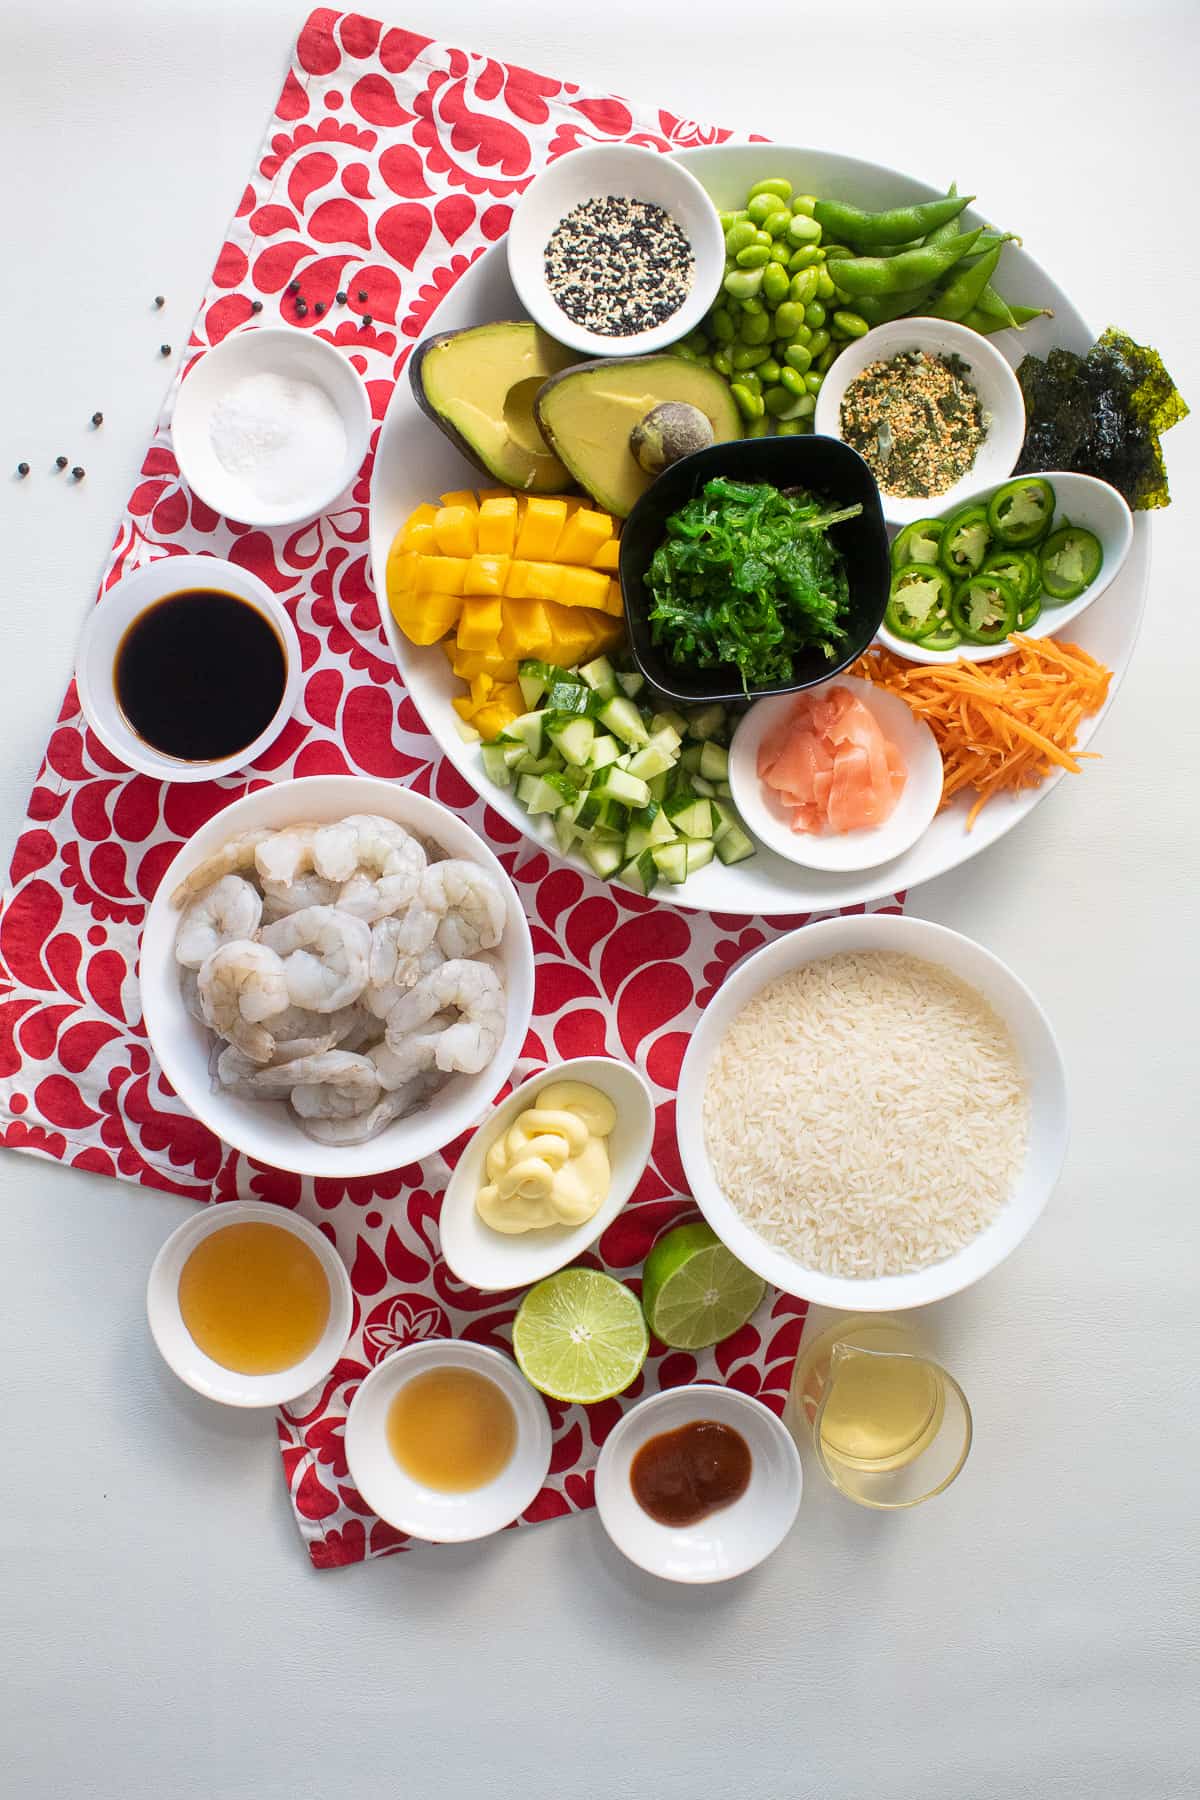 The ingredients for the poke bowls are arranged on a white surface and a red and white patterned cloth.